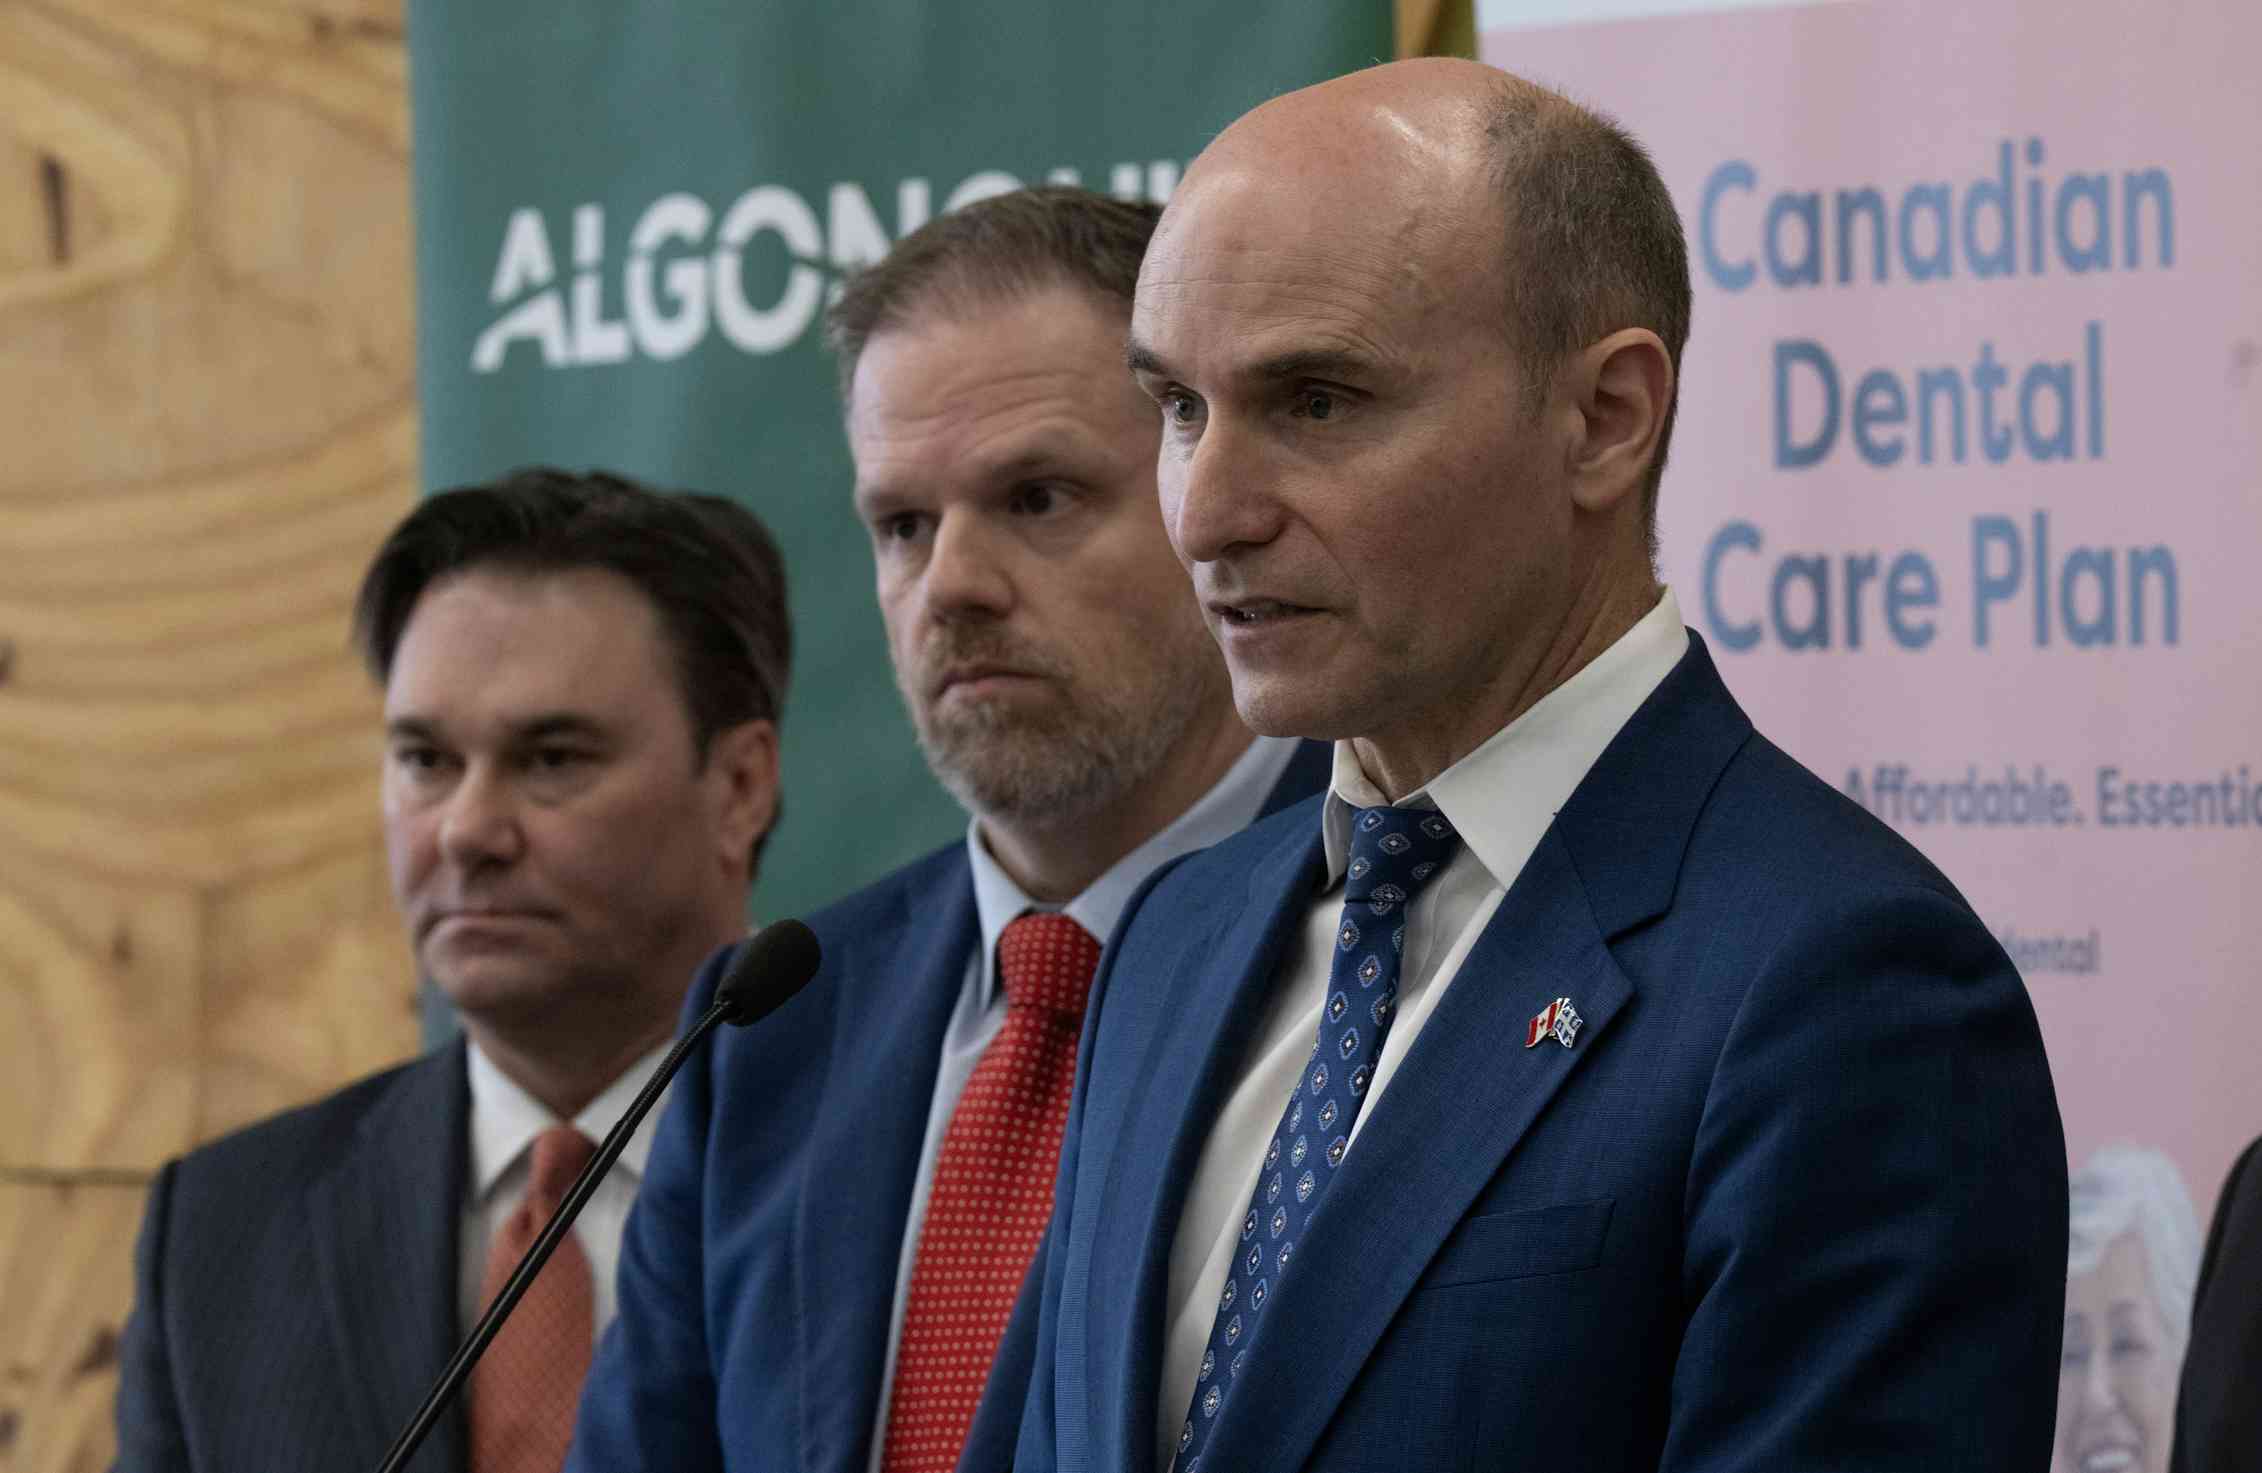 Three men in dark suits in front of a sign reading 'Canadian Dental Care Plan'